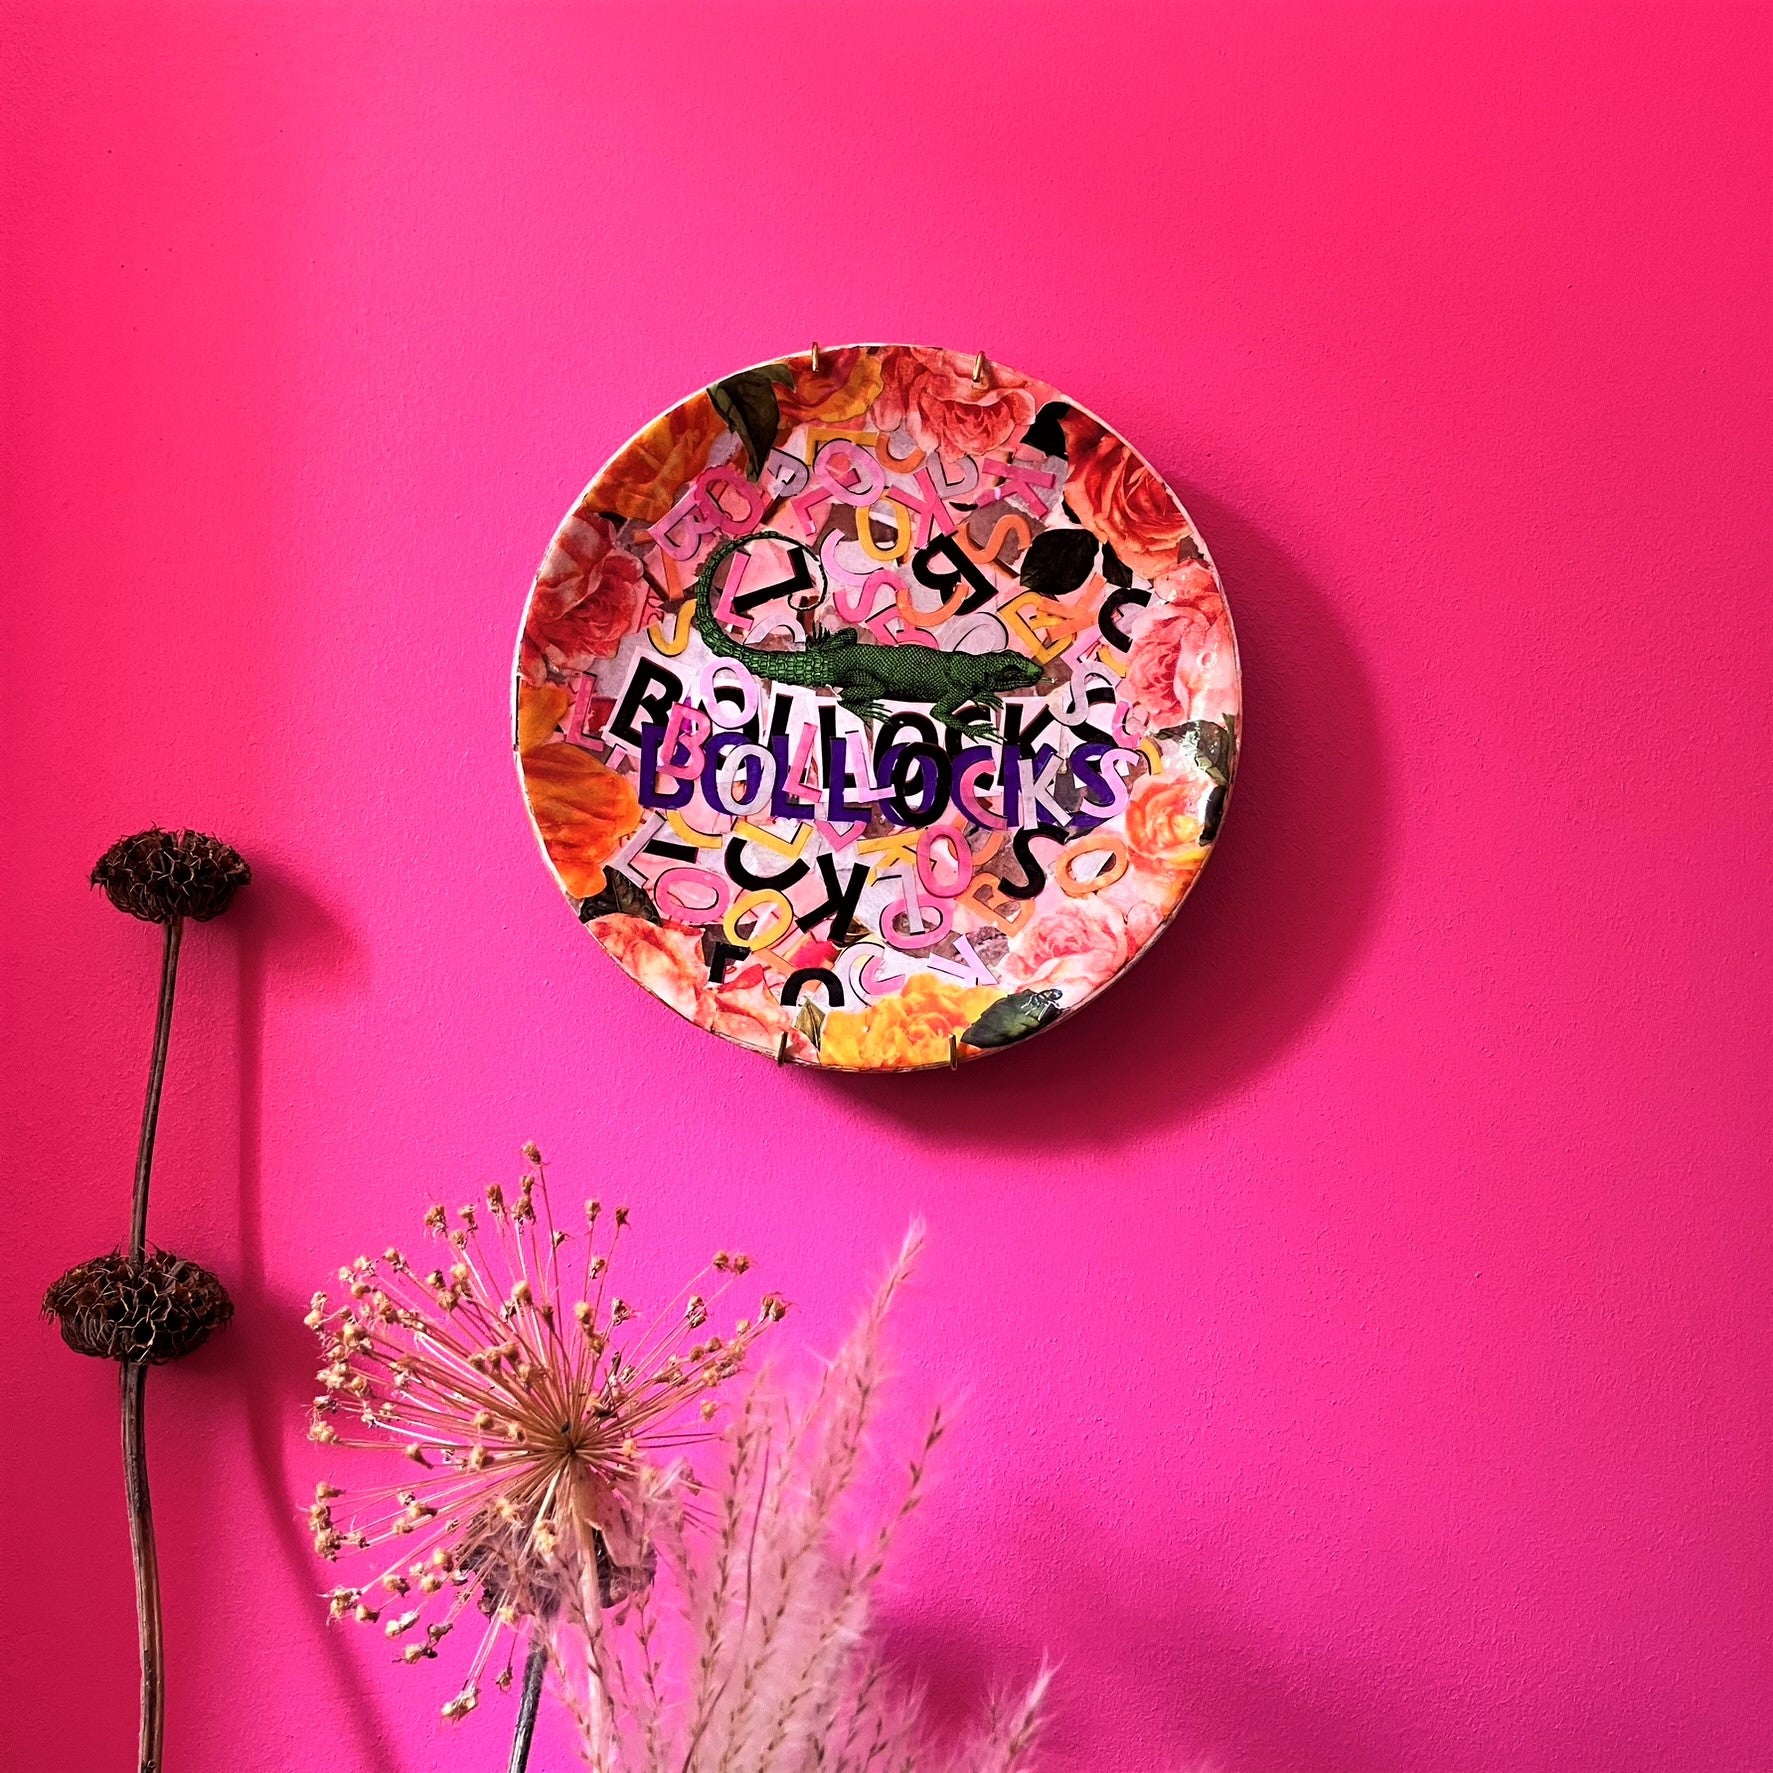 "Bollocks" Wall Plate by House of Frisson, featuring a collage of colourful letters forming the word "bollocks", and a lizard, framed by roses. Plate hanging on a pink wall.